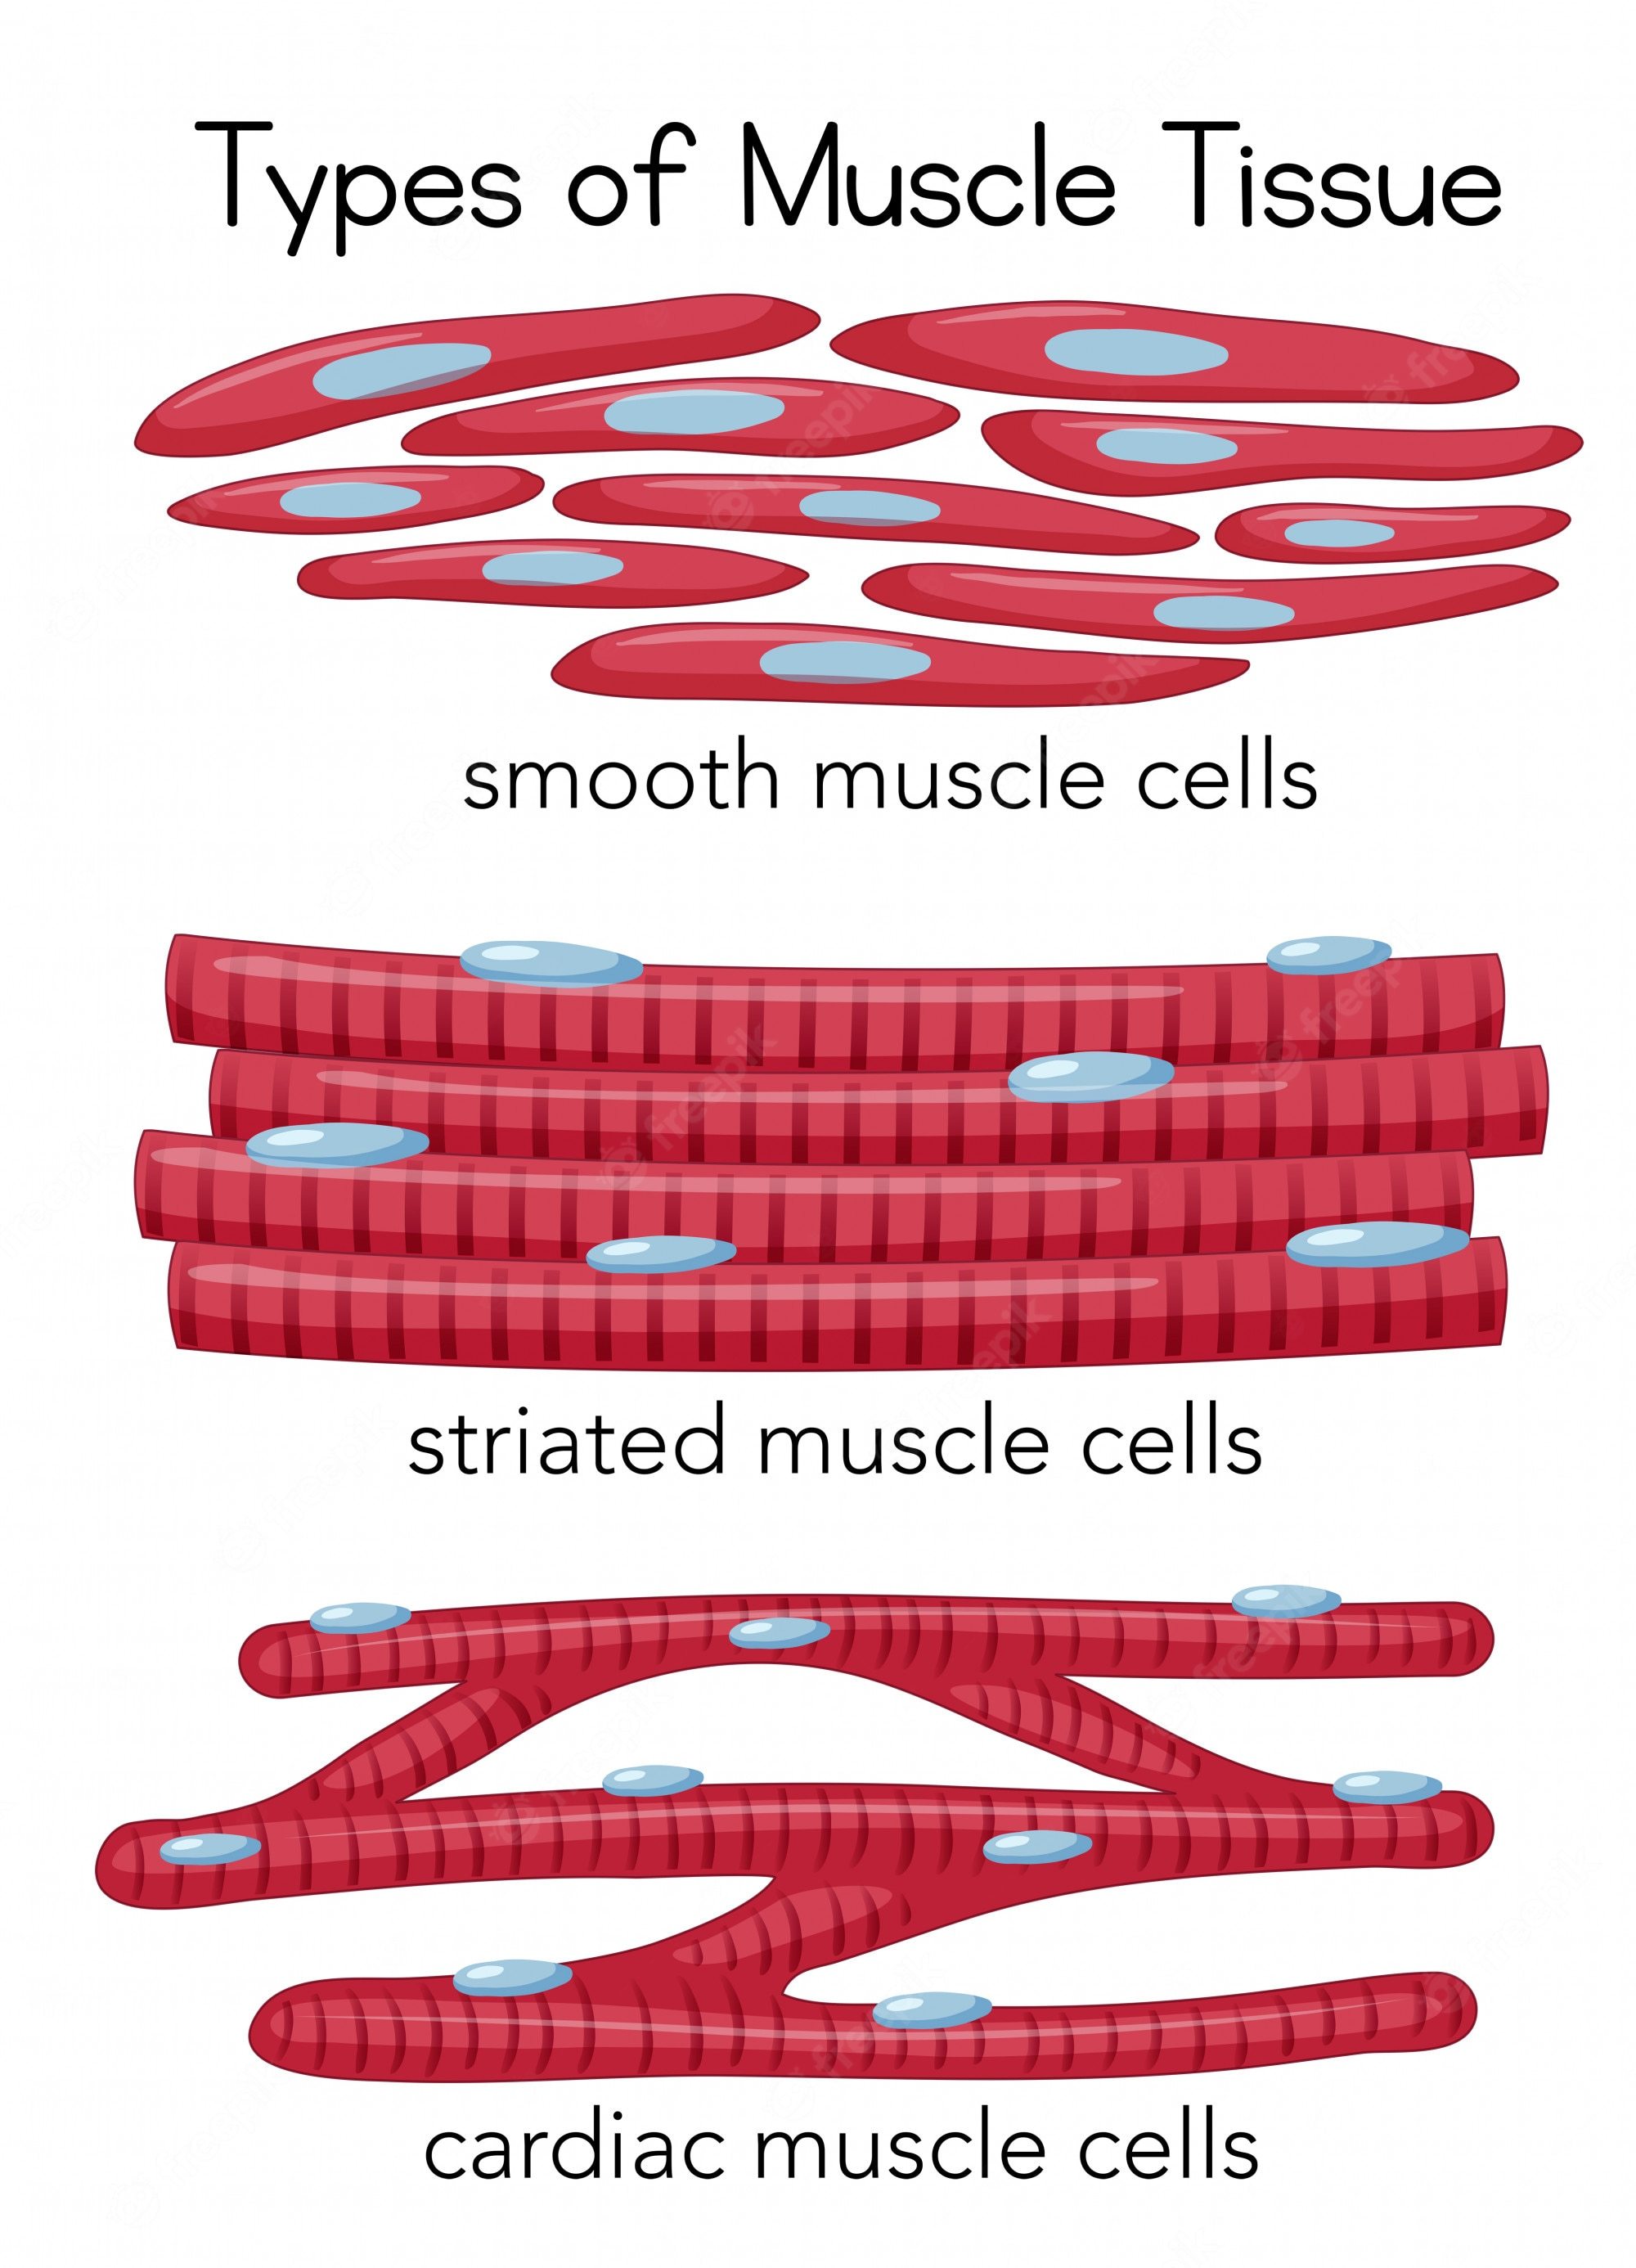 A&P 2.3 Muscle and Nervous Tissue